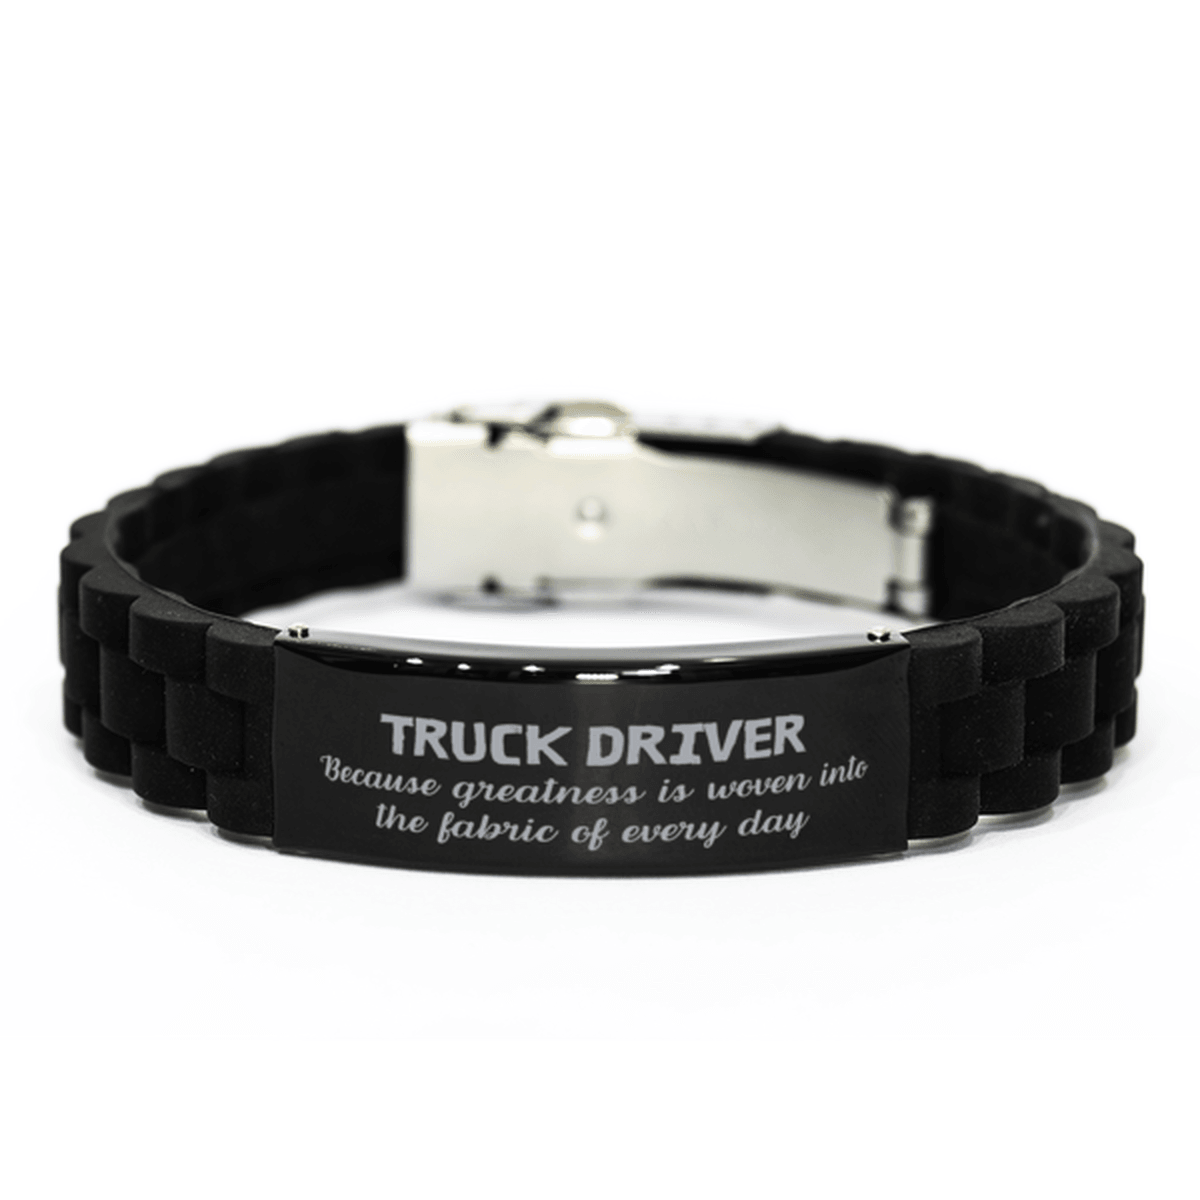 Sarcastic Truck Driver Black Glidelock Clasp Bracelet Gifts, Christmas Holiday Gifts for Truck Driver Birthday, Truck Driver: Because greatness is woven into the fabric of every day, Coworkers, Friends - Mallard Moon Gift Shop